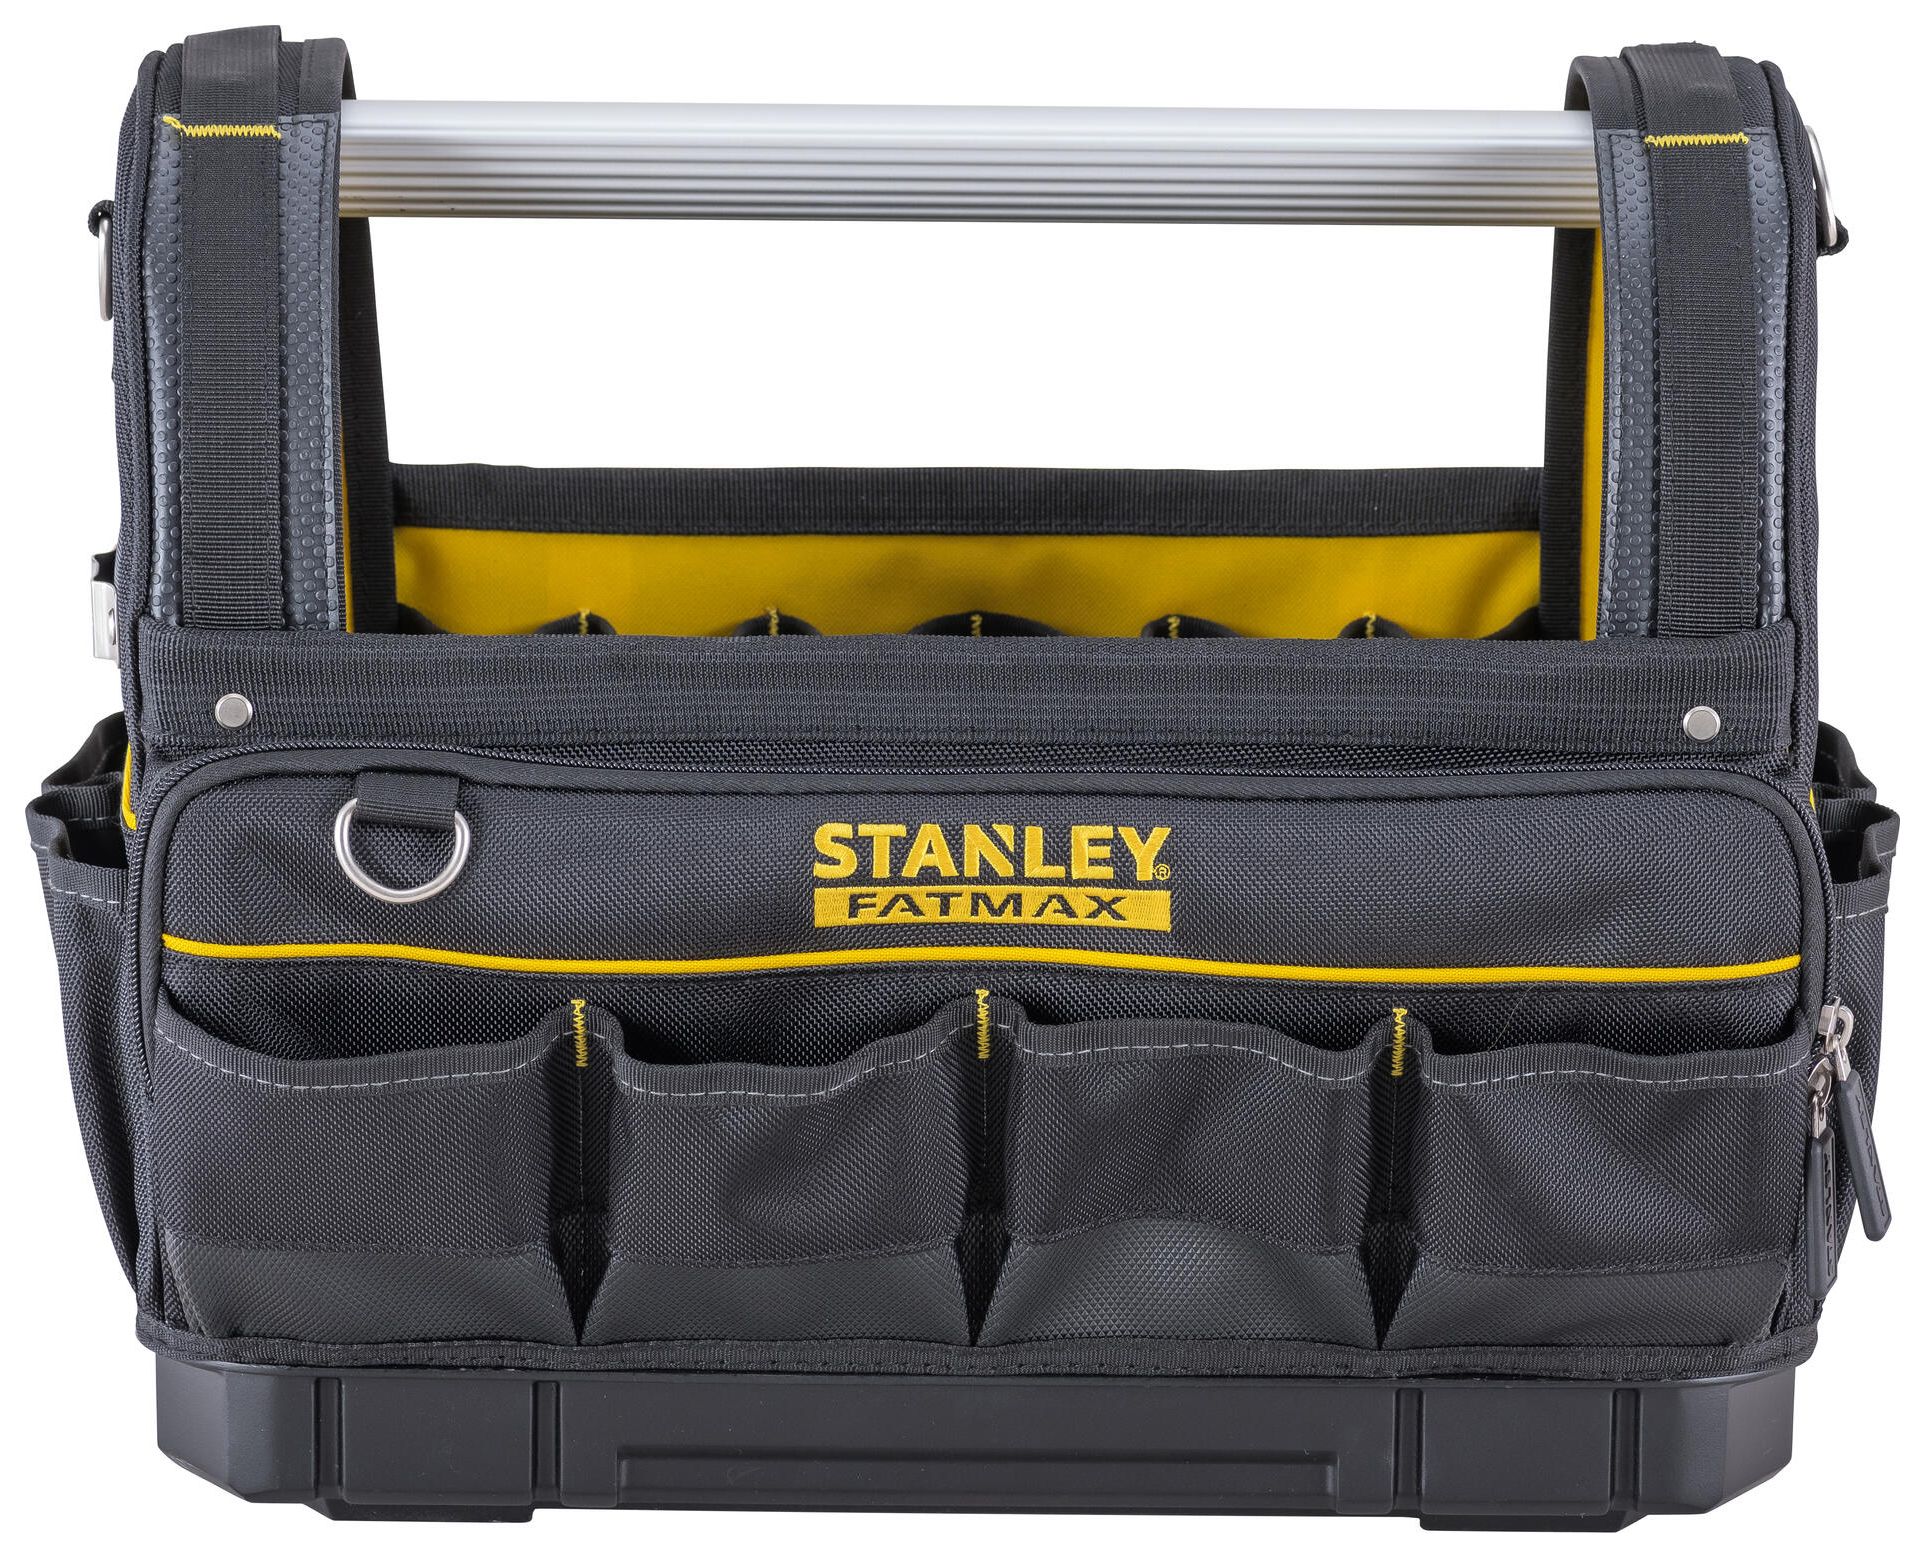 Image of STANLEY FATMAX PROSTACK™ Tool Storage Soft Tote